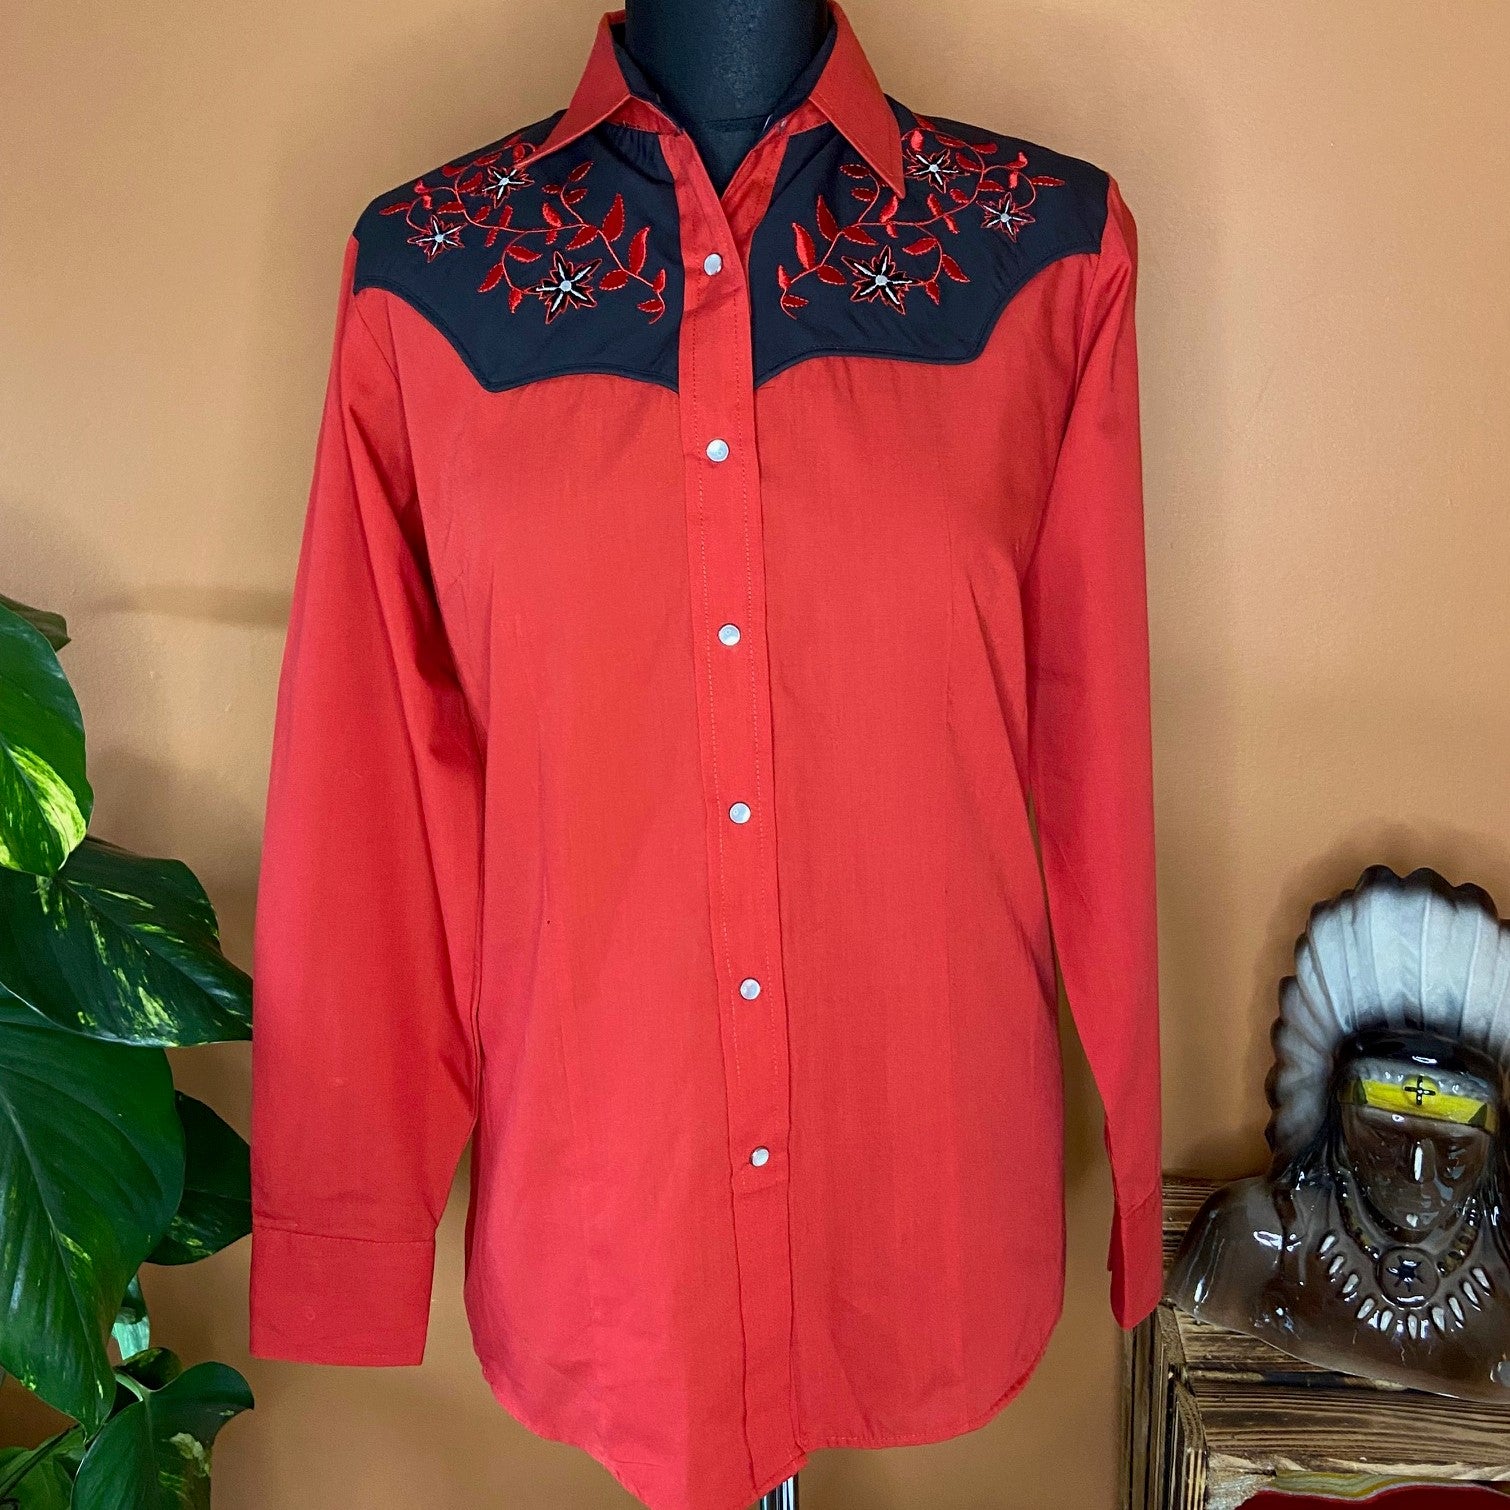 Authentic red and black panel western shirt